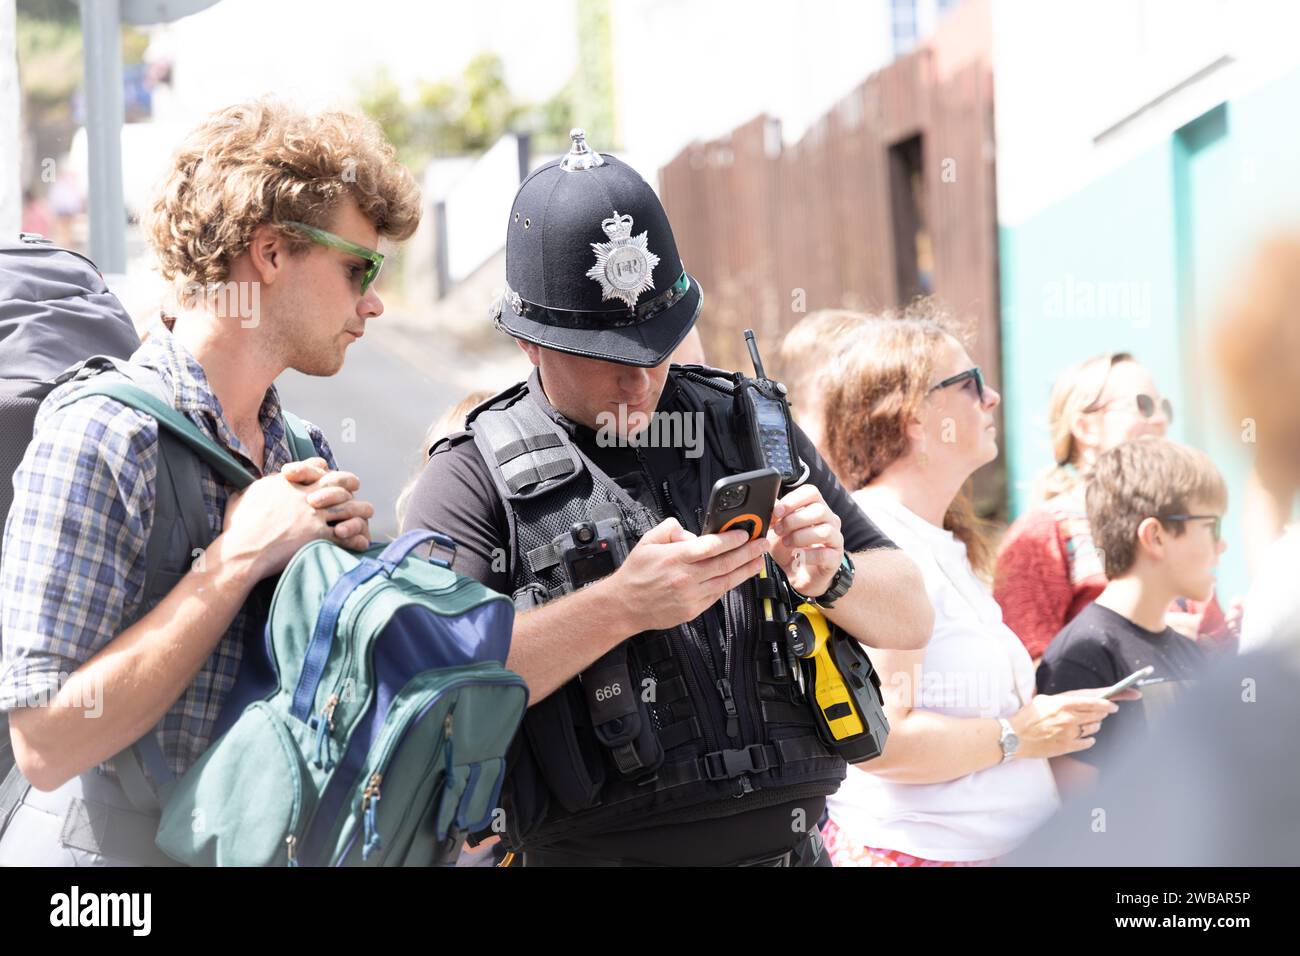 Policeman helping person in street by looking up information on phone for a bystander Stock Photo